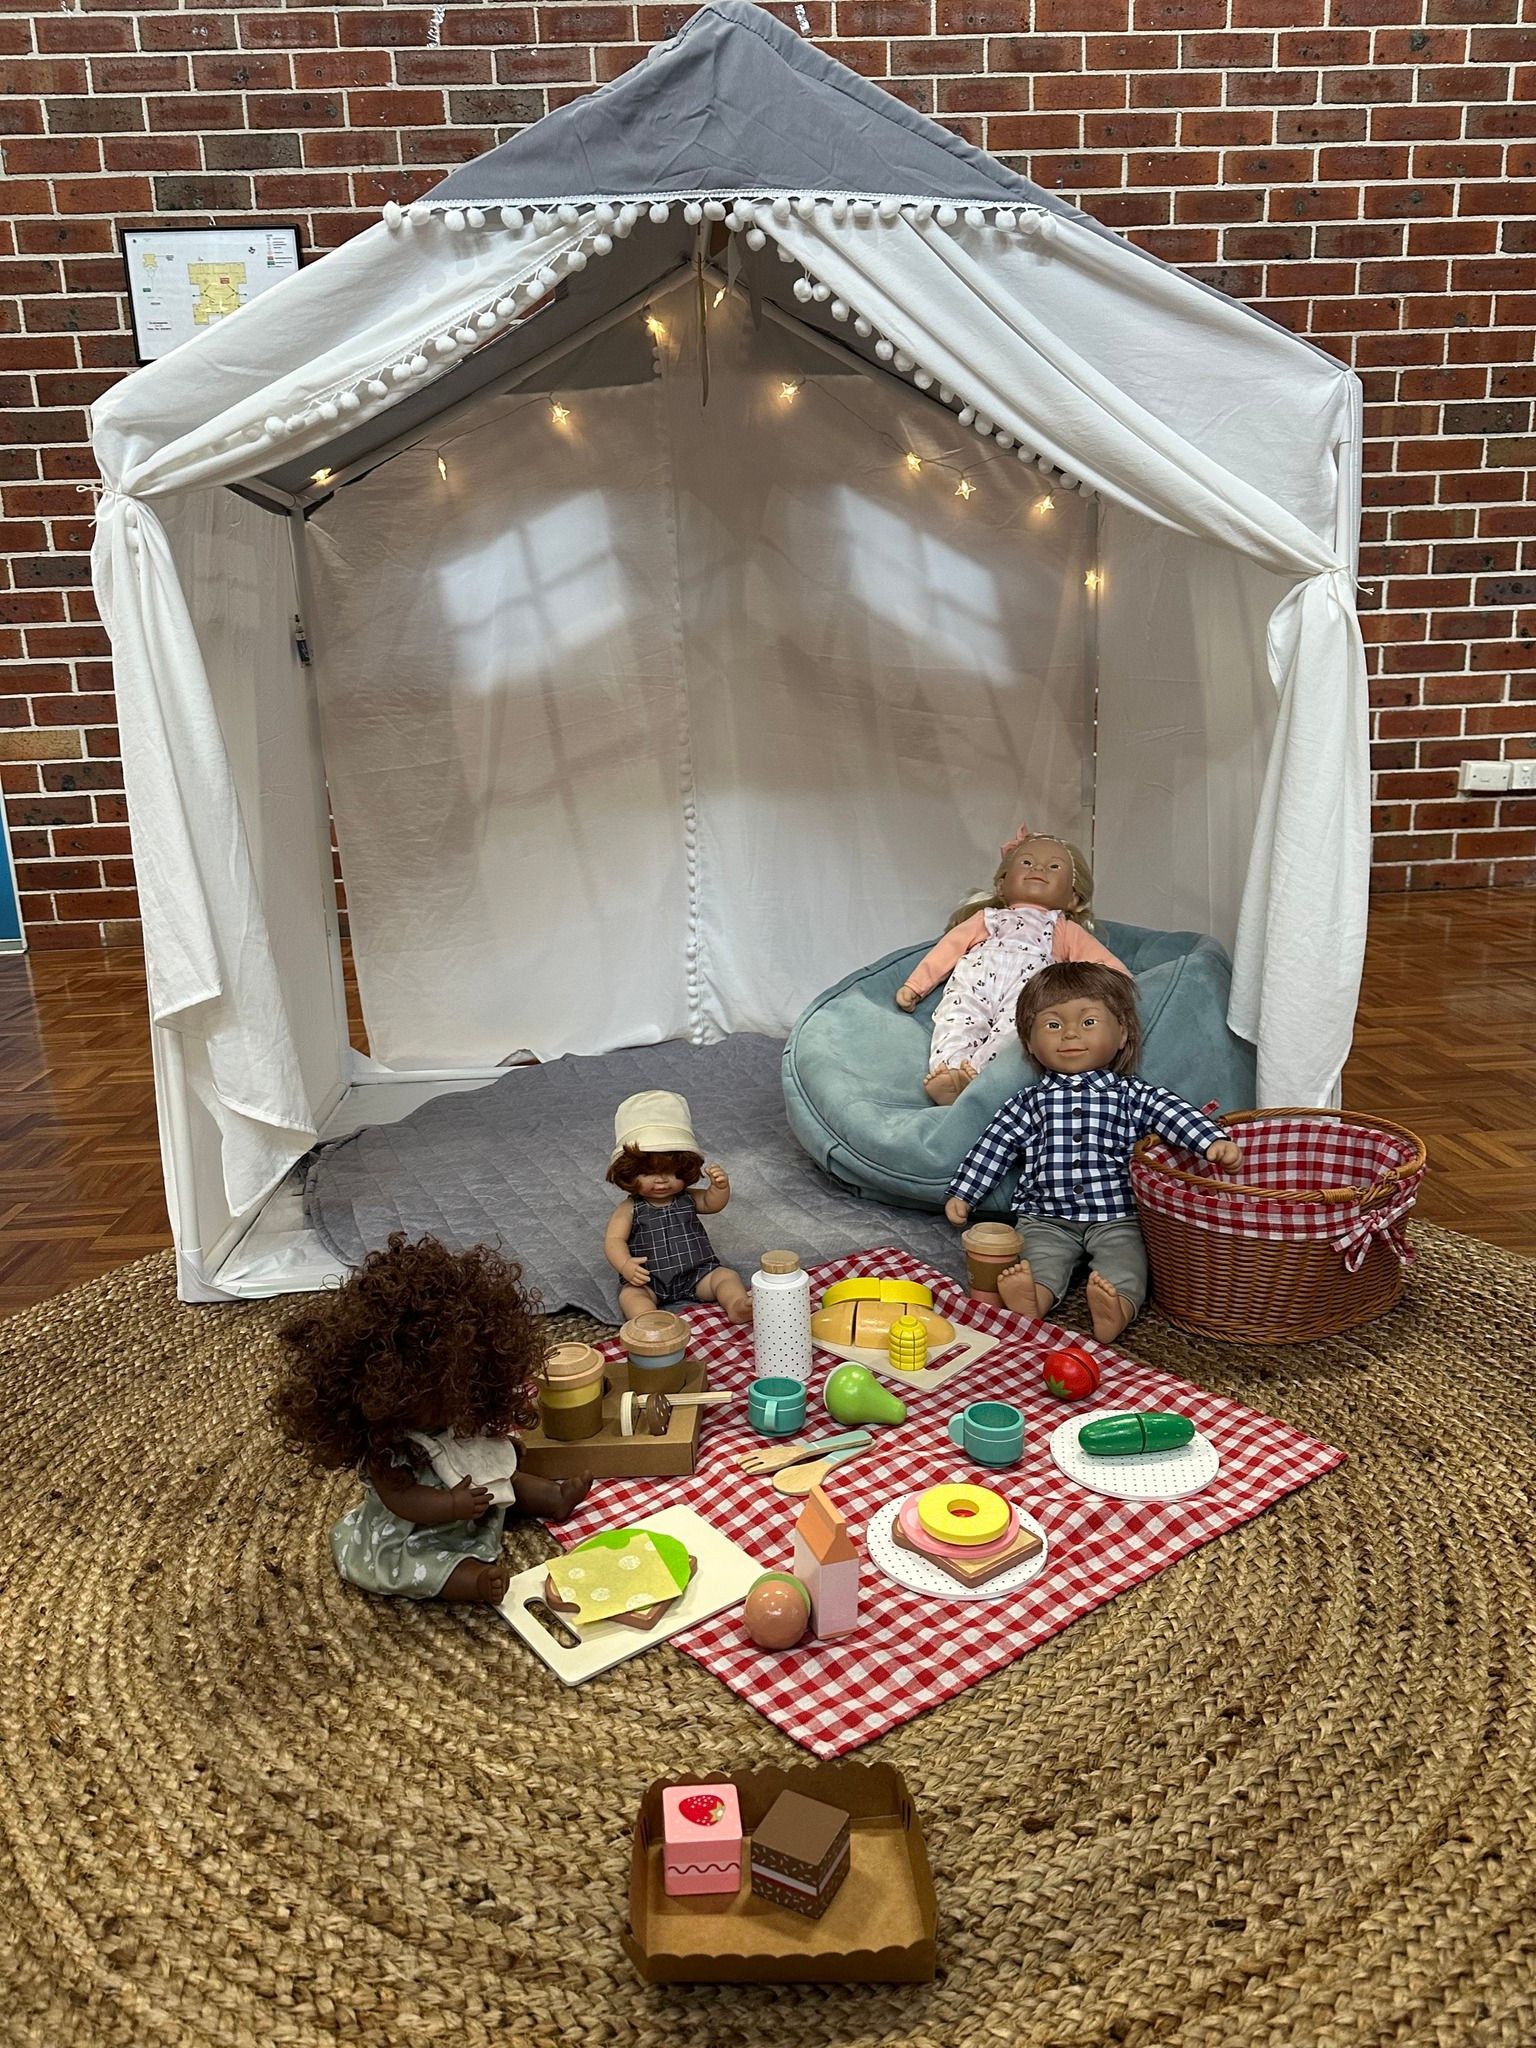 Children's play room with dolls on a picnic rug — The Happy Human Hub